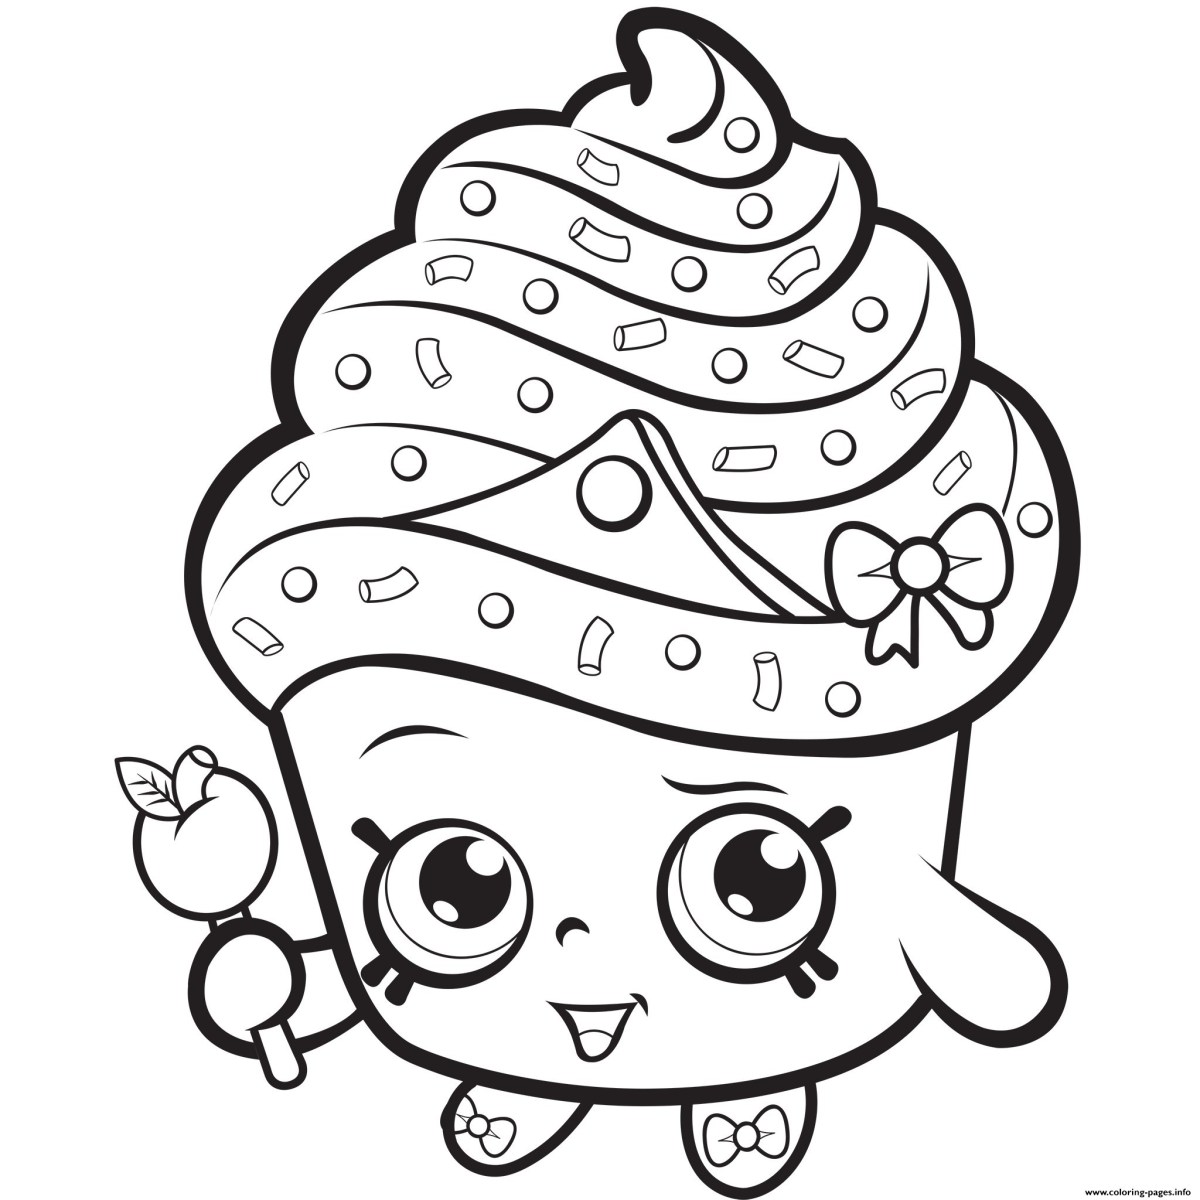 Coloring Page For Kids Princess Colouring Pages Pdf From